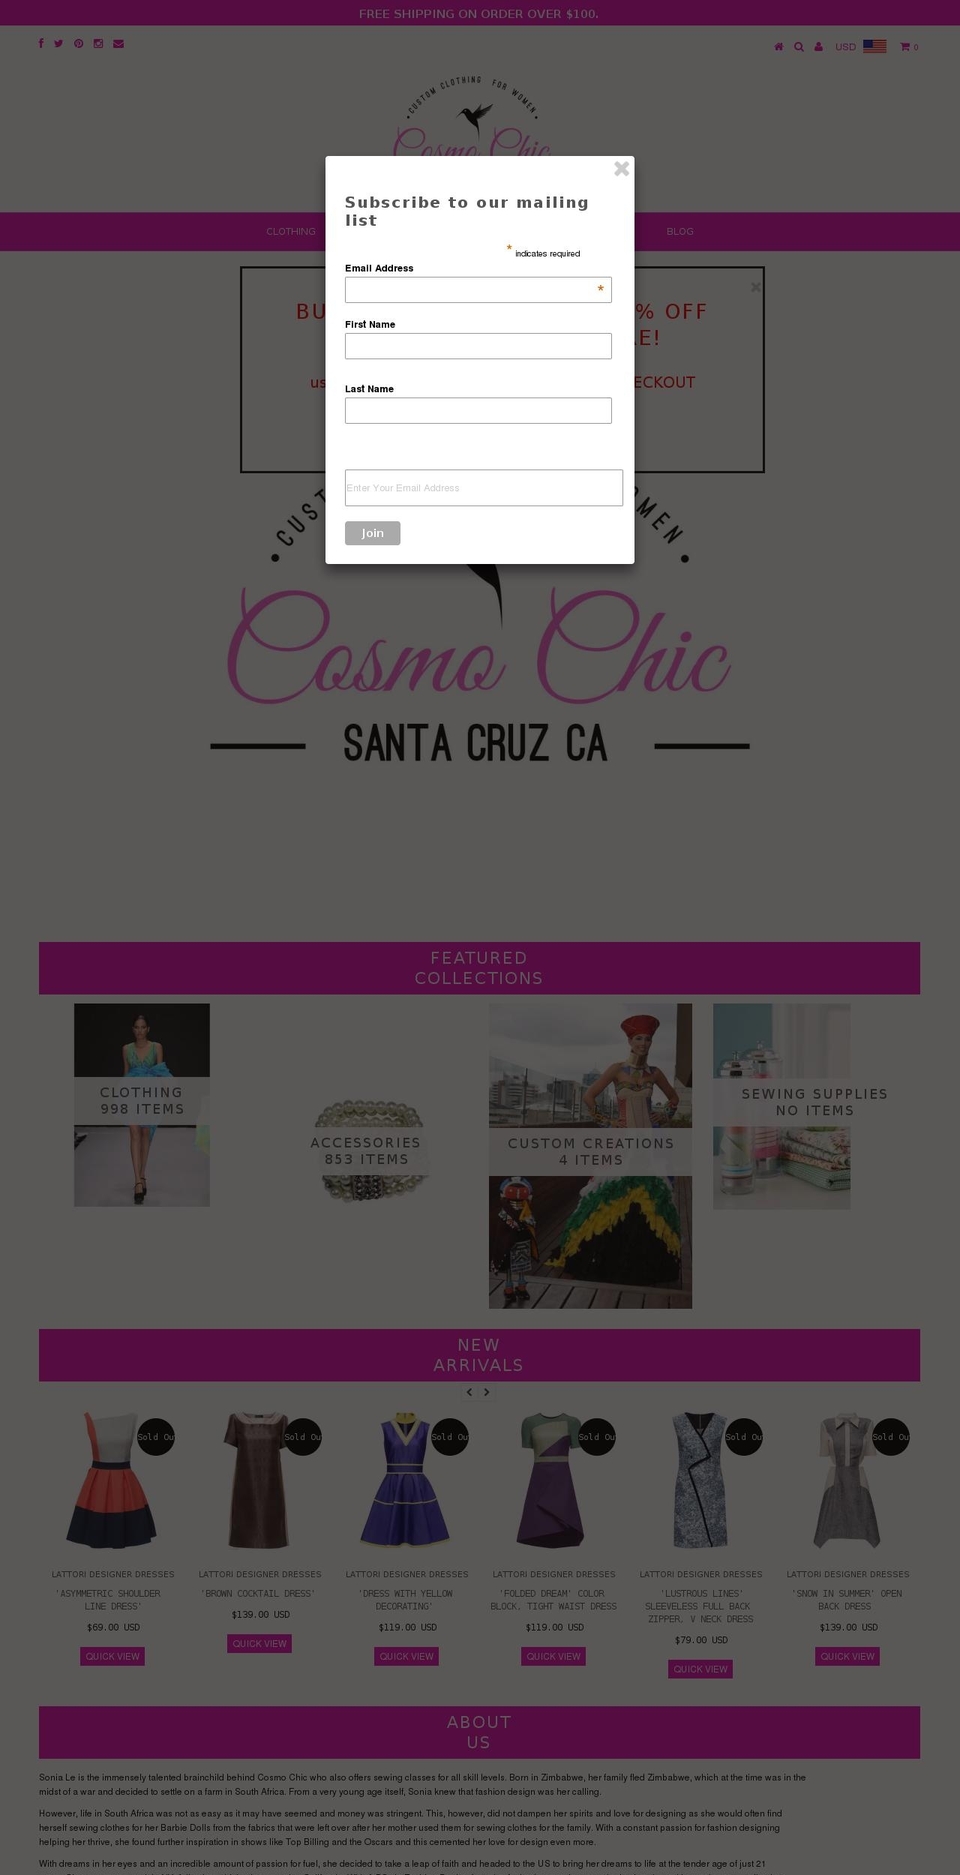 qeretail Shopify theme site example cosmochicsc.com